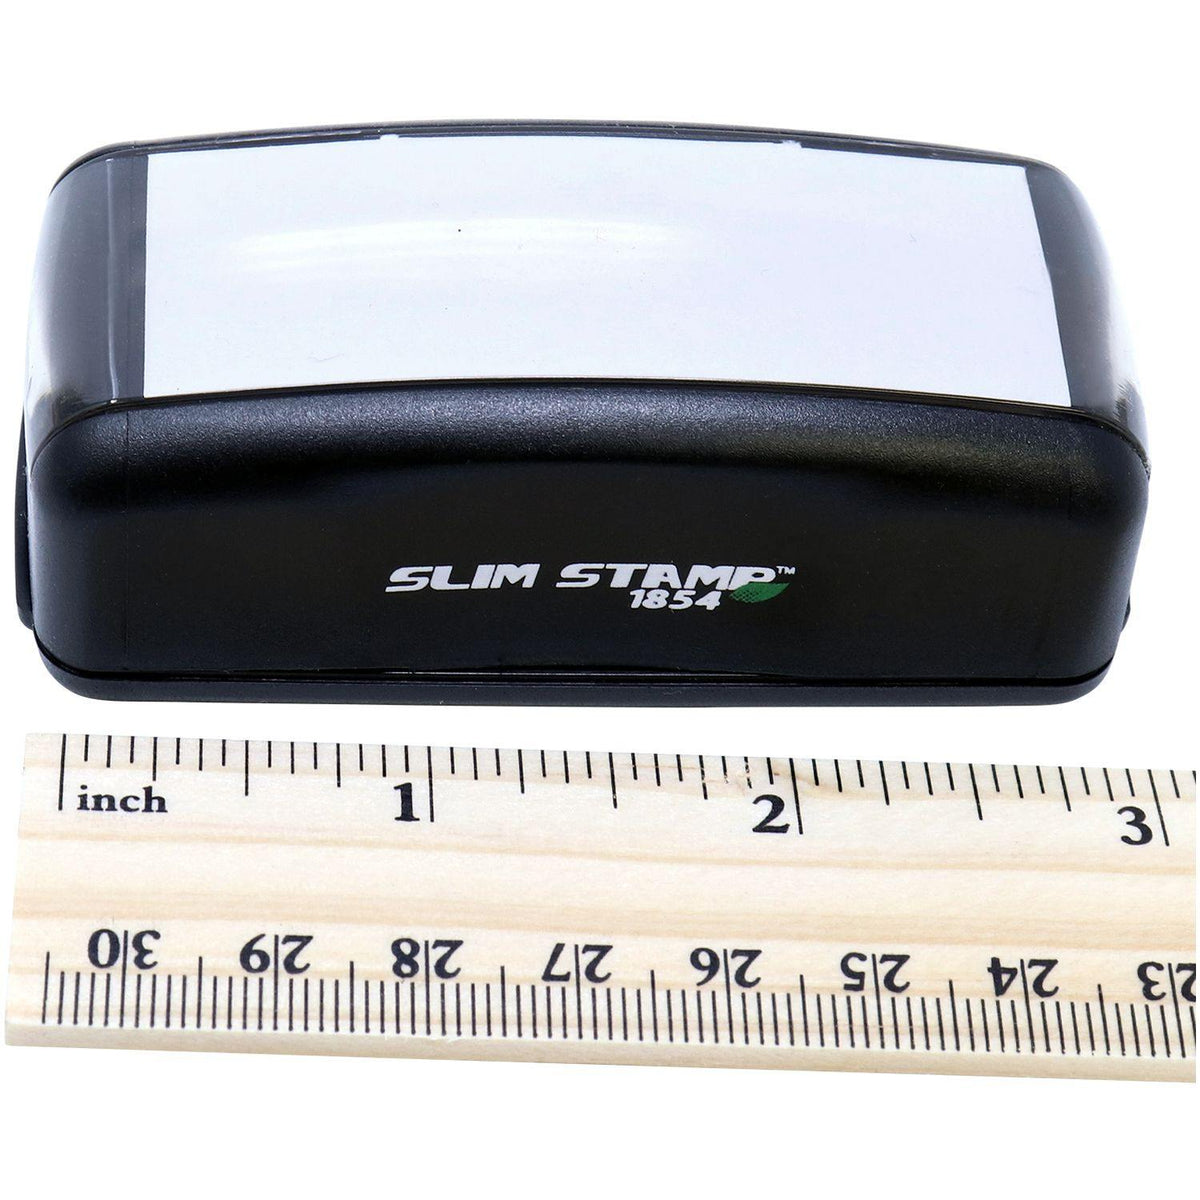 Measurement Large Pre-Inked Outline Copy Stamp with Ruler